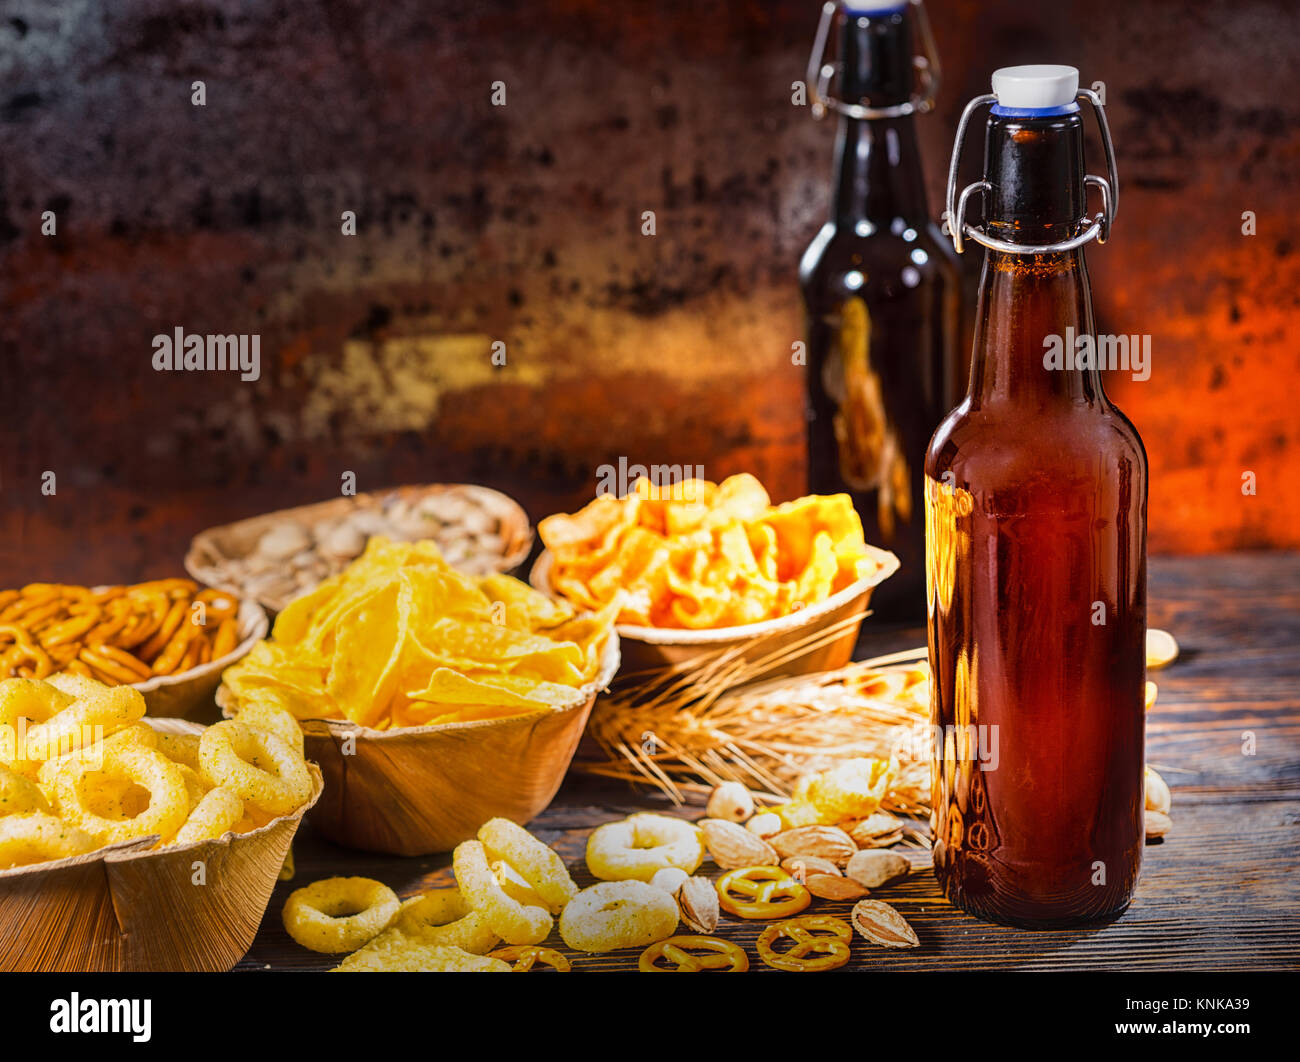 Plates with snacks near two bottles of beer, wheat, scattered nuts and pretzels on dark wooden desk. Food and beverages concept Stock Photo